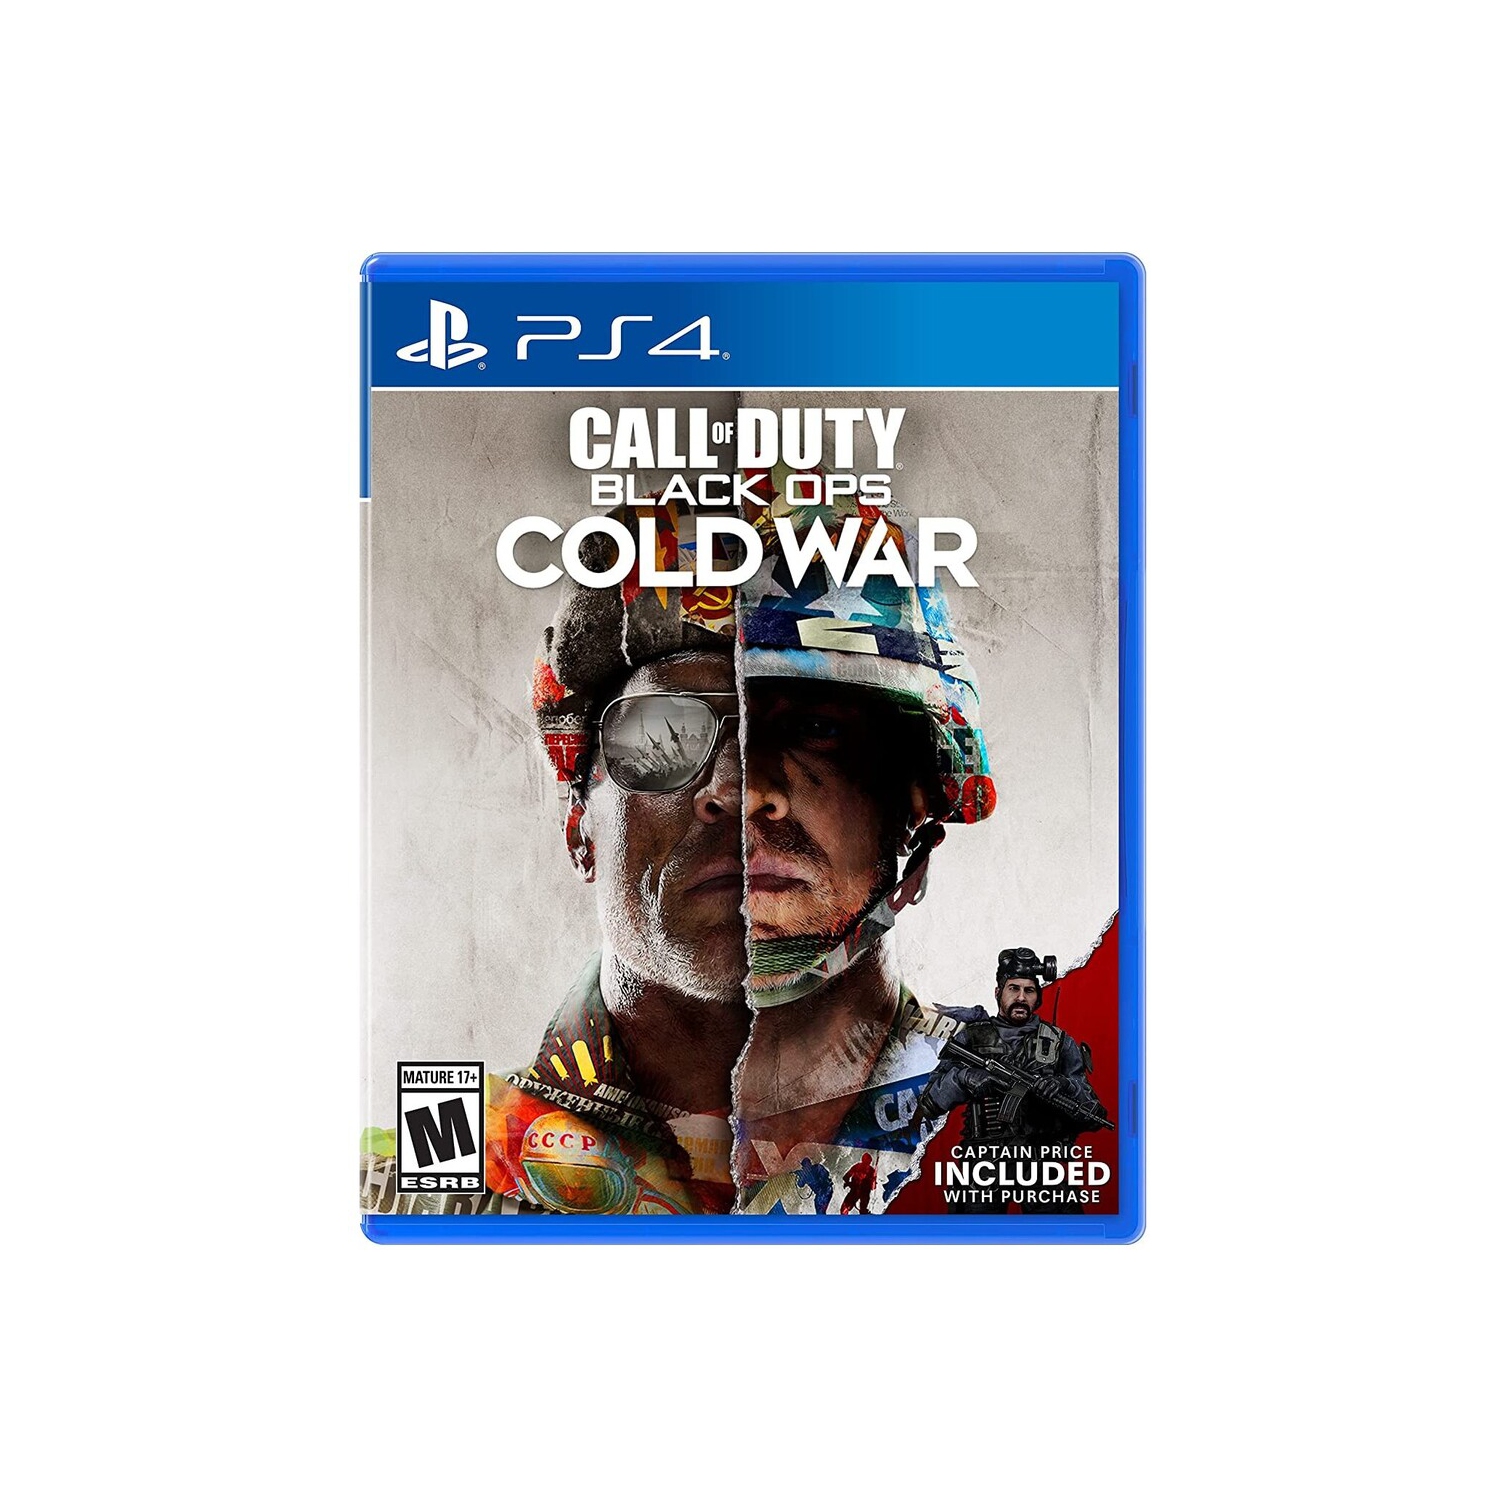 Call of Duty: Black Ops Cold War for PlayStation 4 [VIDEOGAMES]